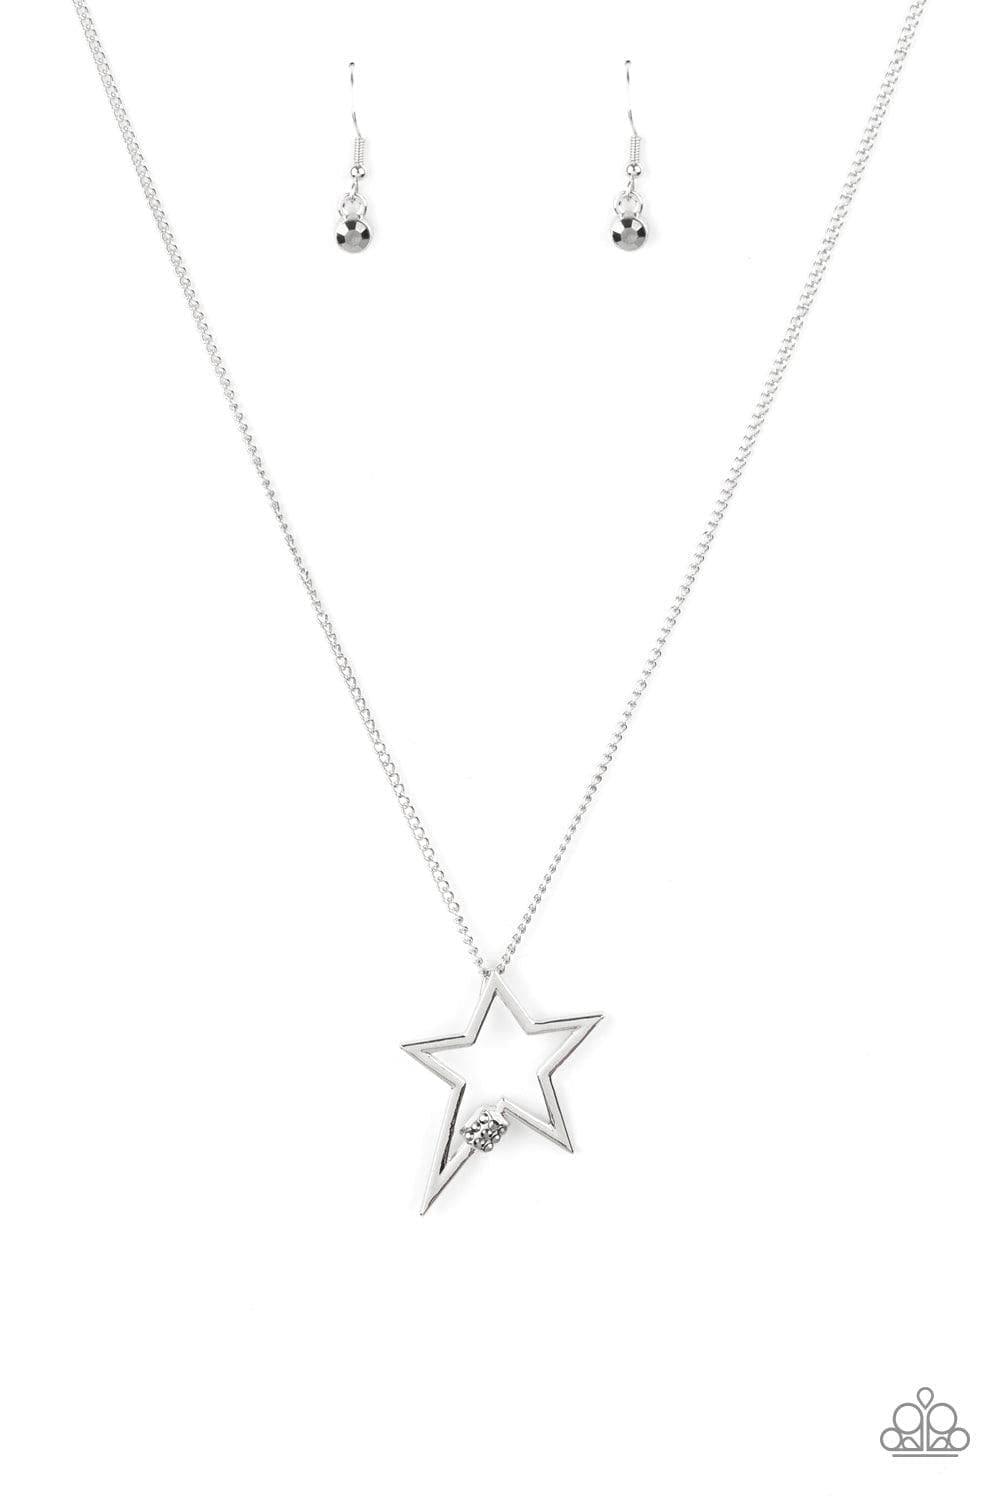 Paparazzi Accessories - Light Up The Sky - Silver Necklace - Bling by JessieK